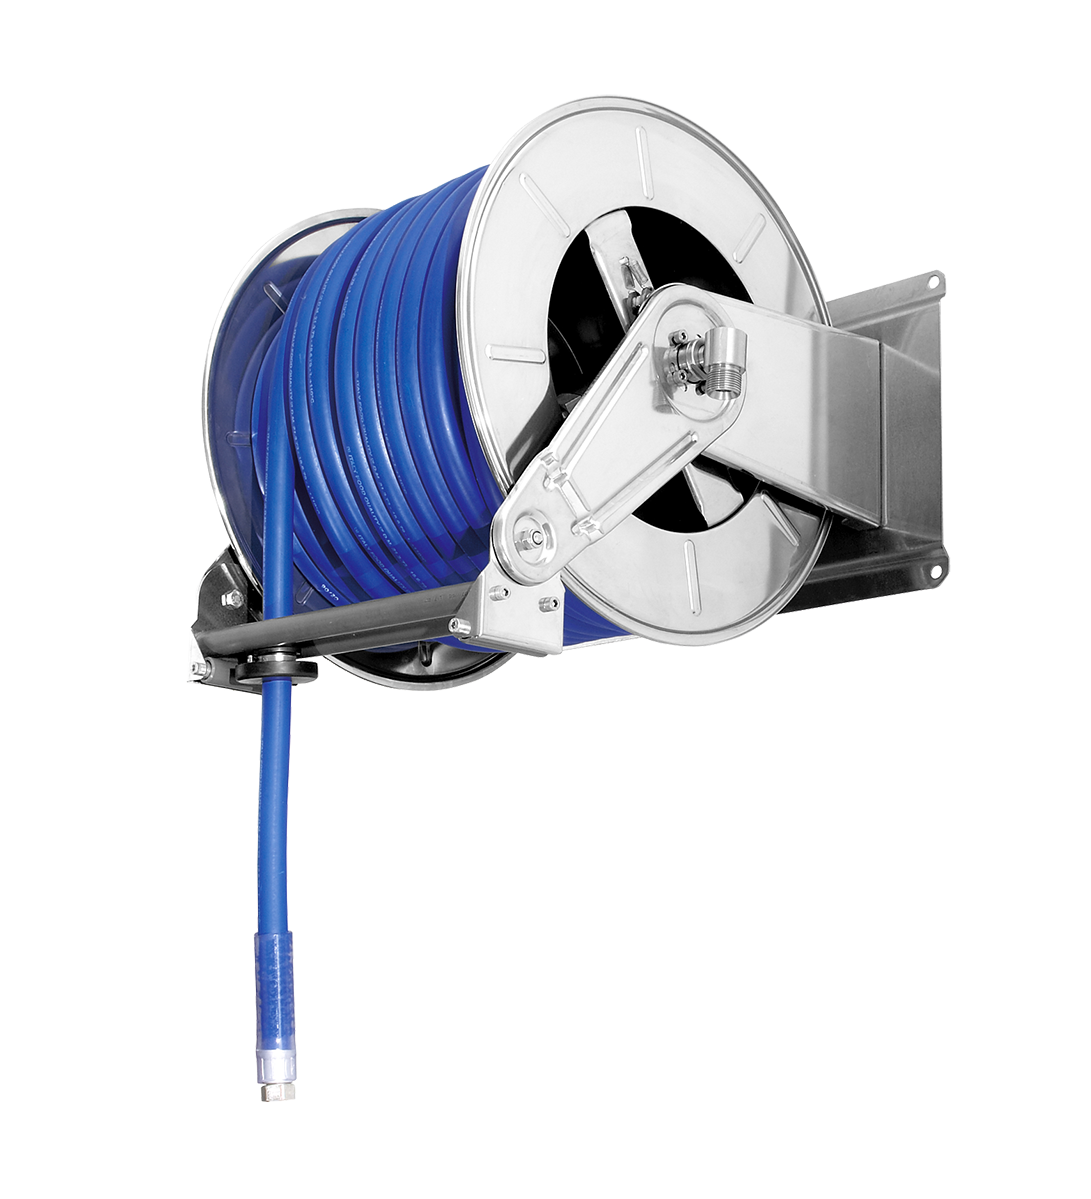 industrial cleaning systems automatic hose reel 40 meters hose BoonsFIS